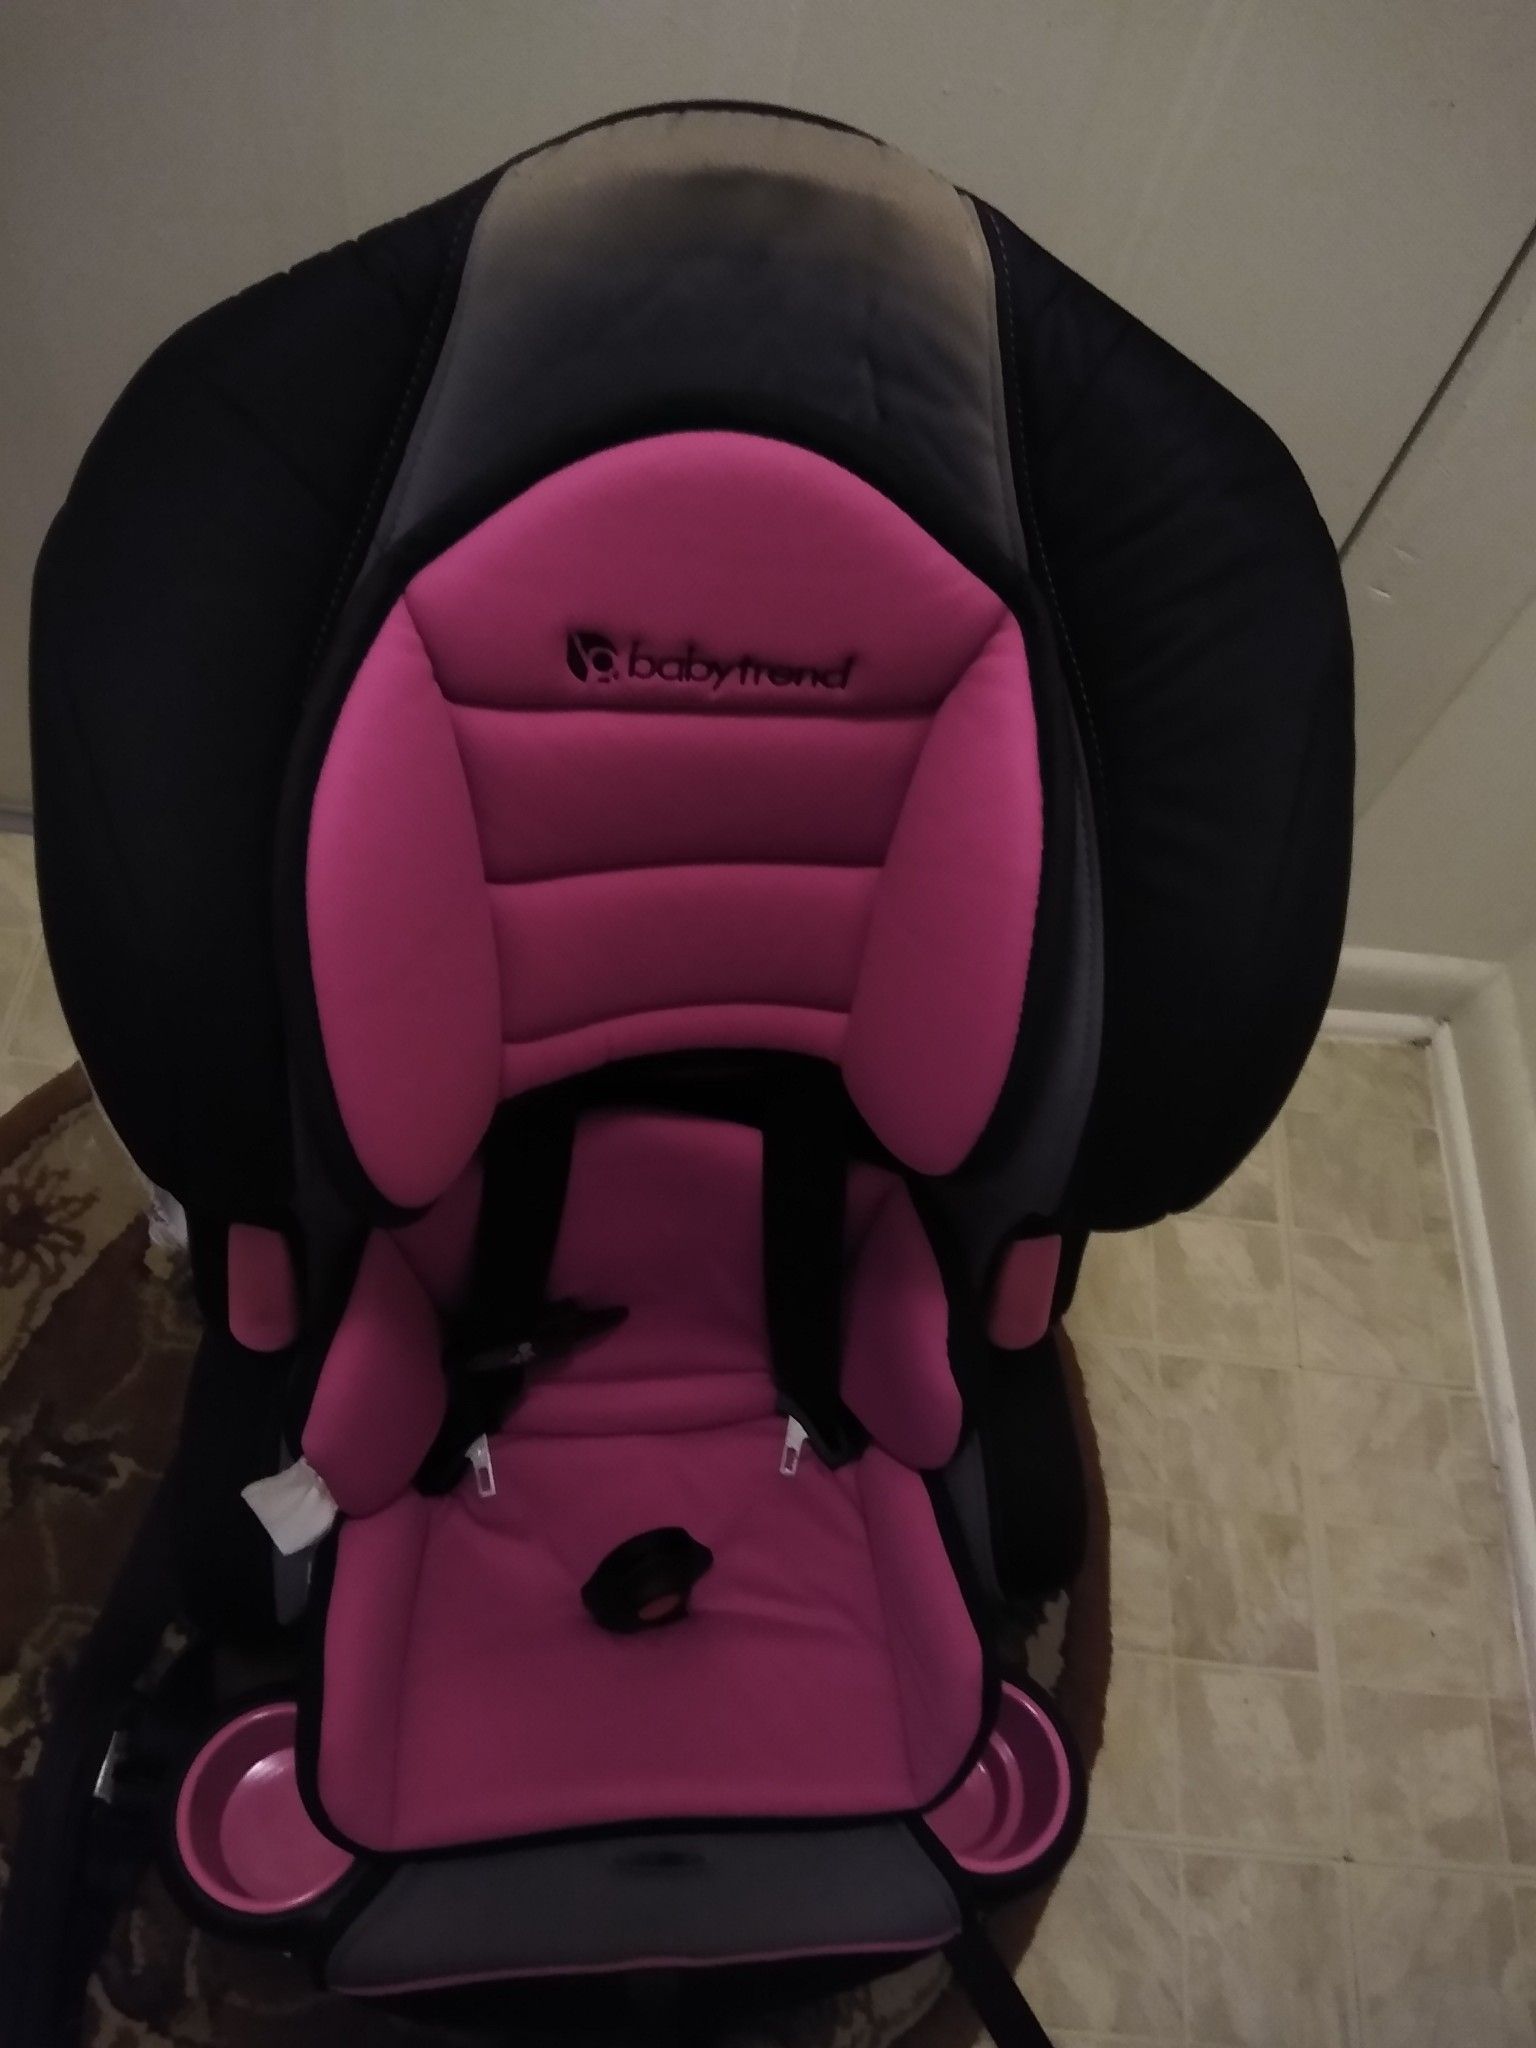 Toddler girl car seats $45 or offer the top is a little faded but it's good